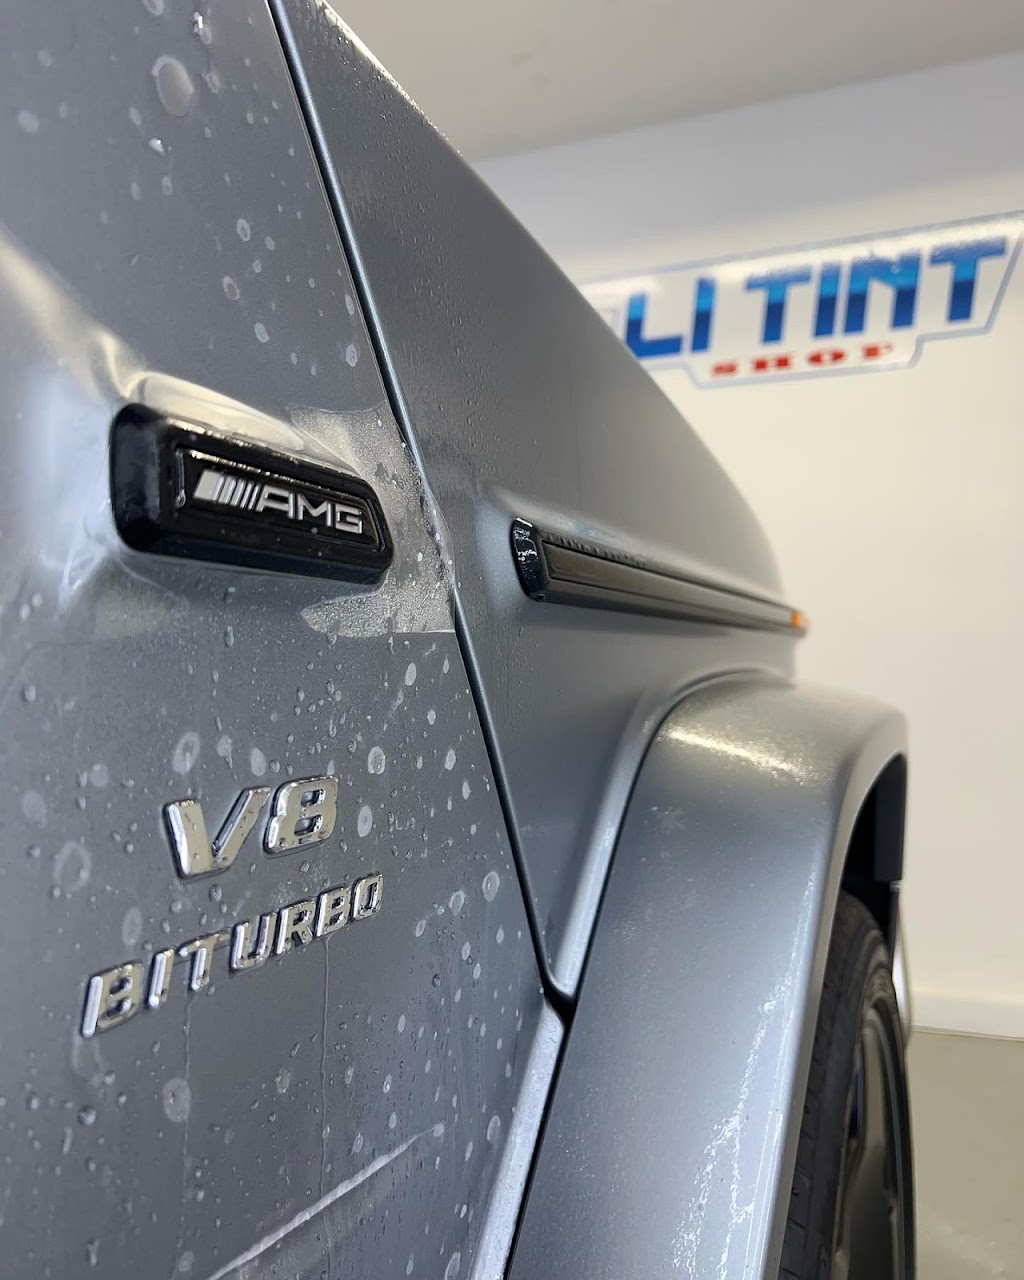 Li Tint Shop-Paint Protection Film Ceramic Coatings Window Tint | 1555 Rocky Point Rd, Middle Island, NY 11953 | Phone: (631) 575-6809